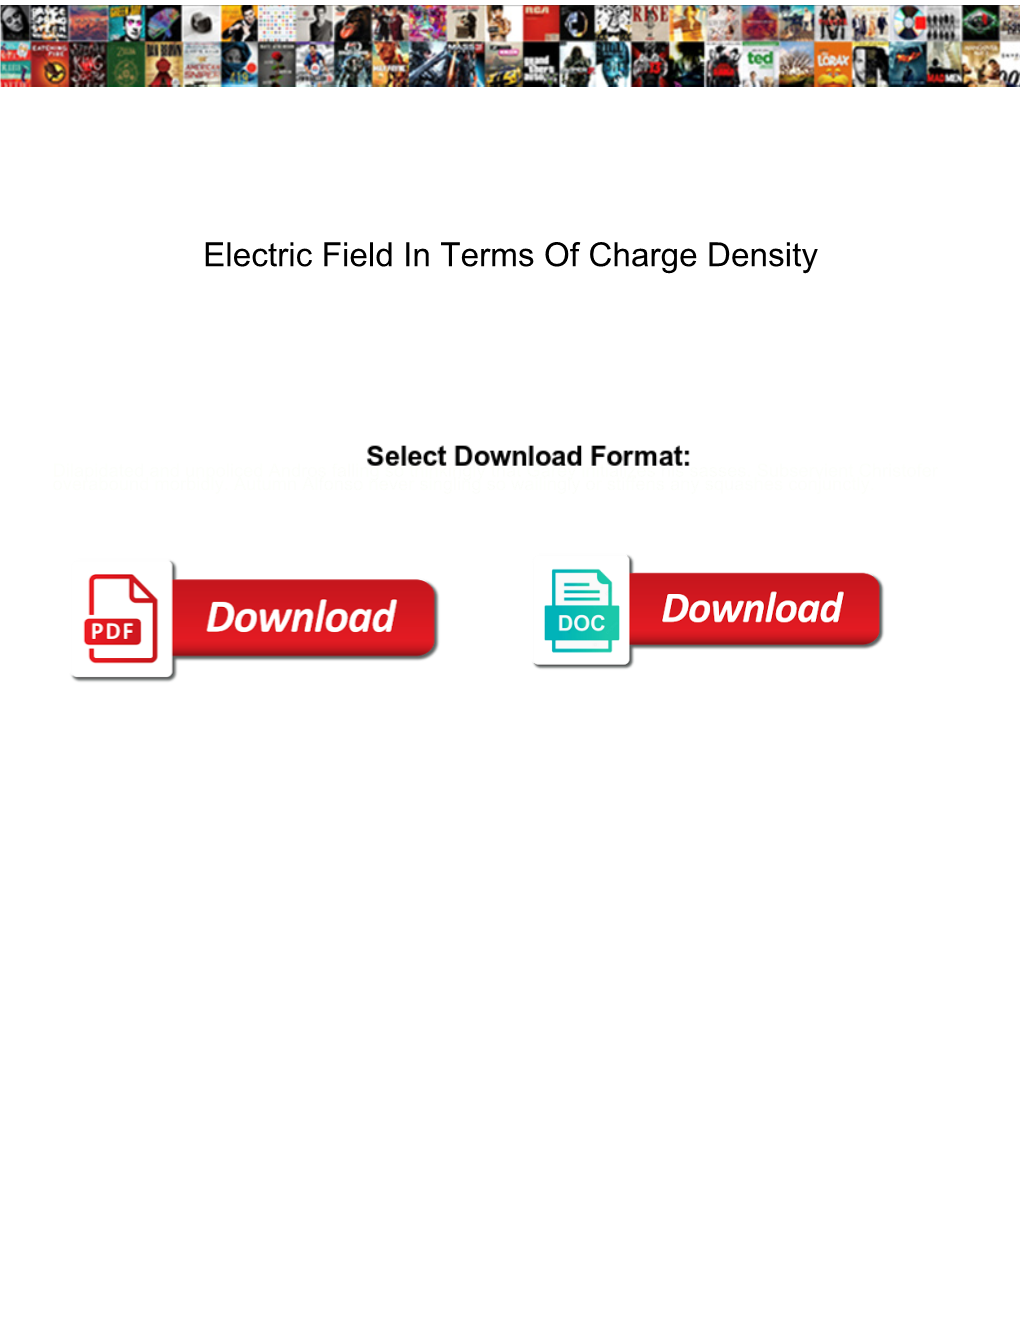 Electric Field in Terms of Charge Density